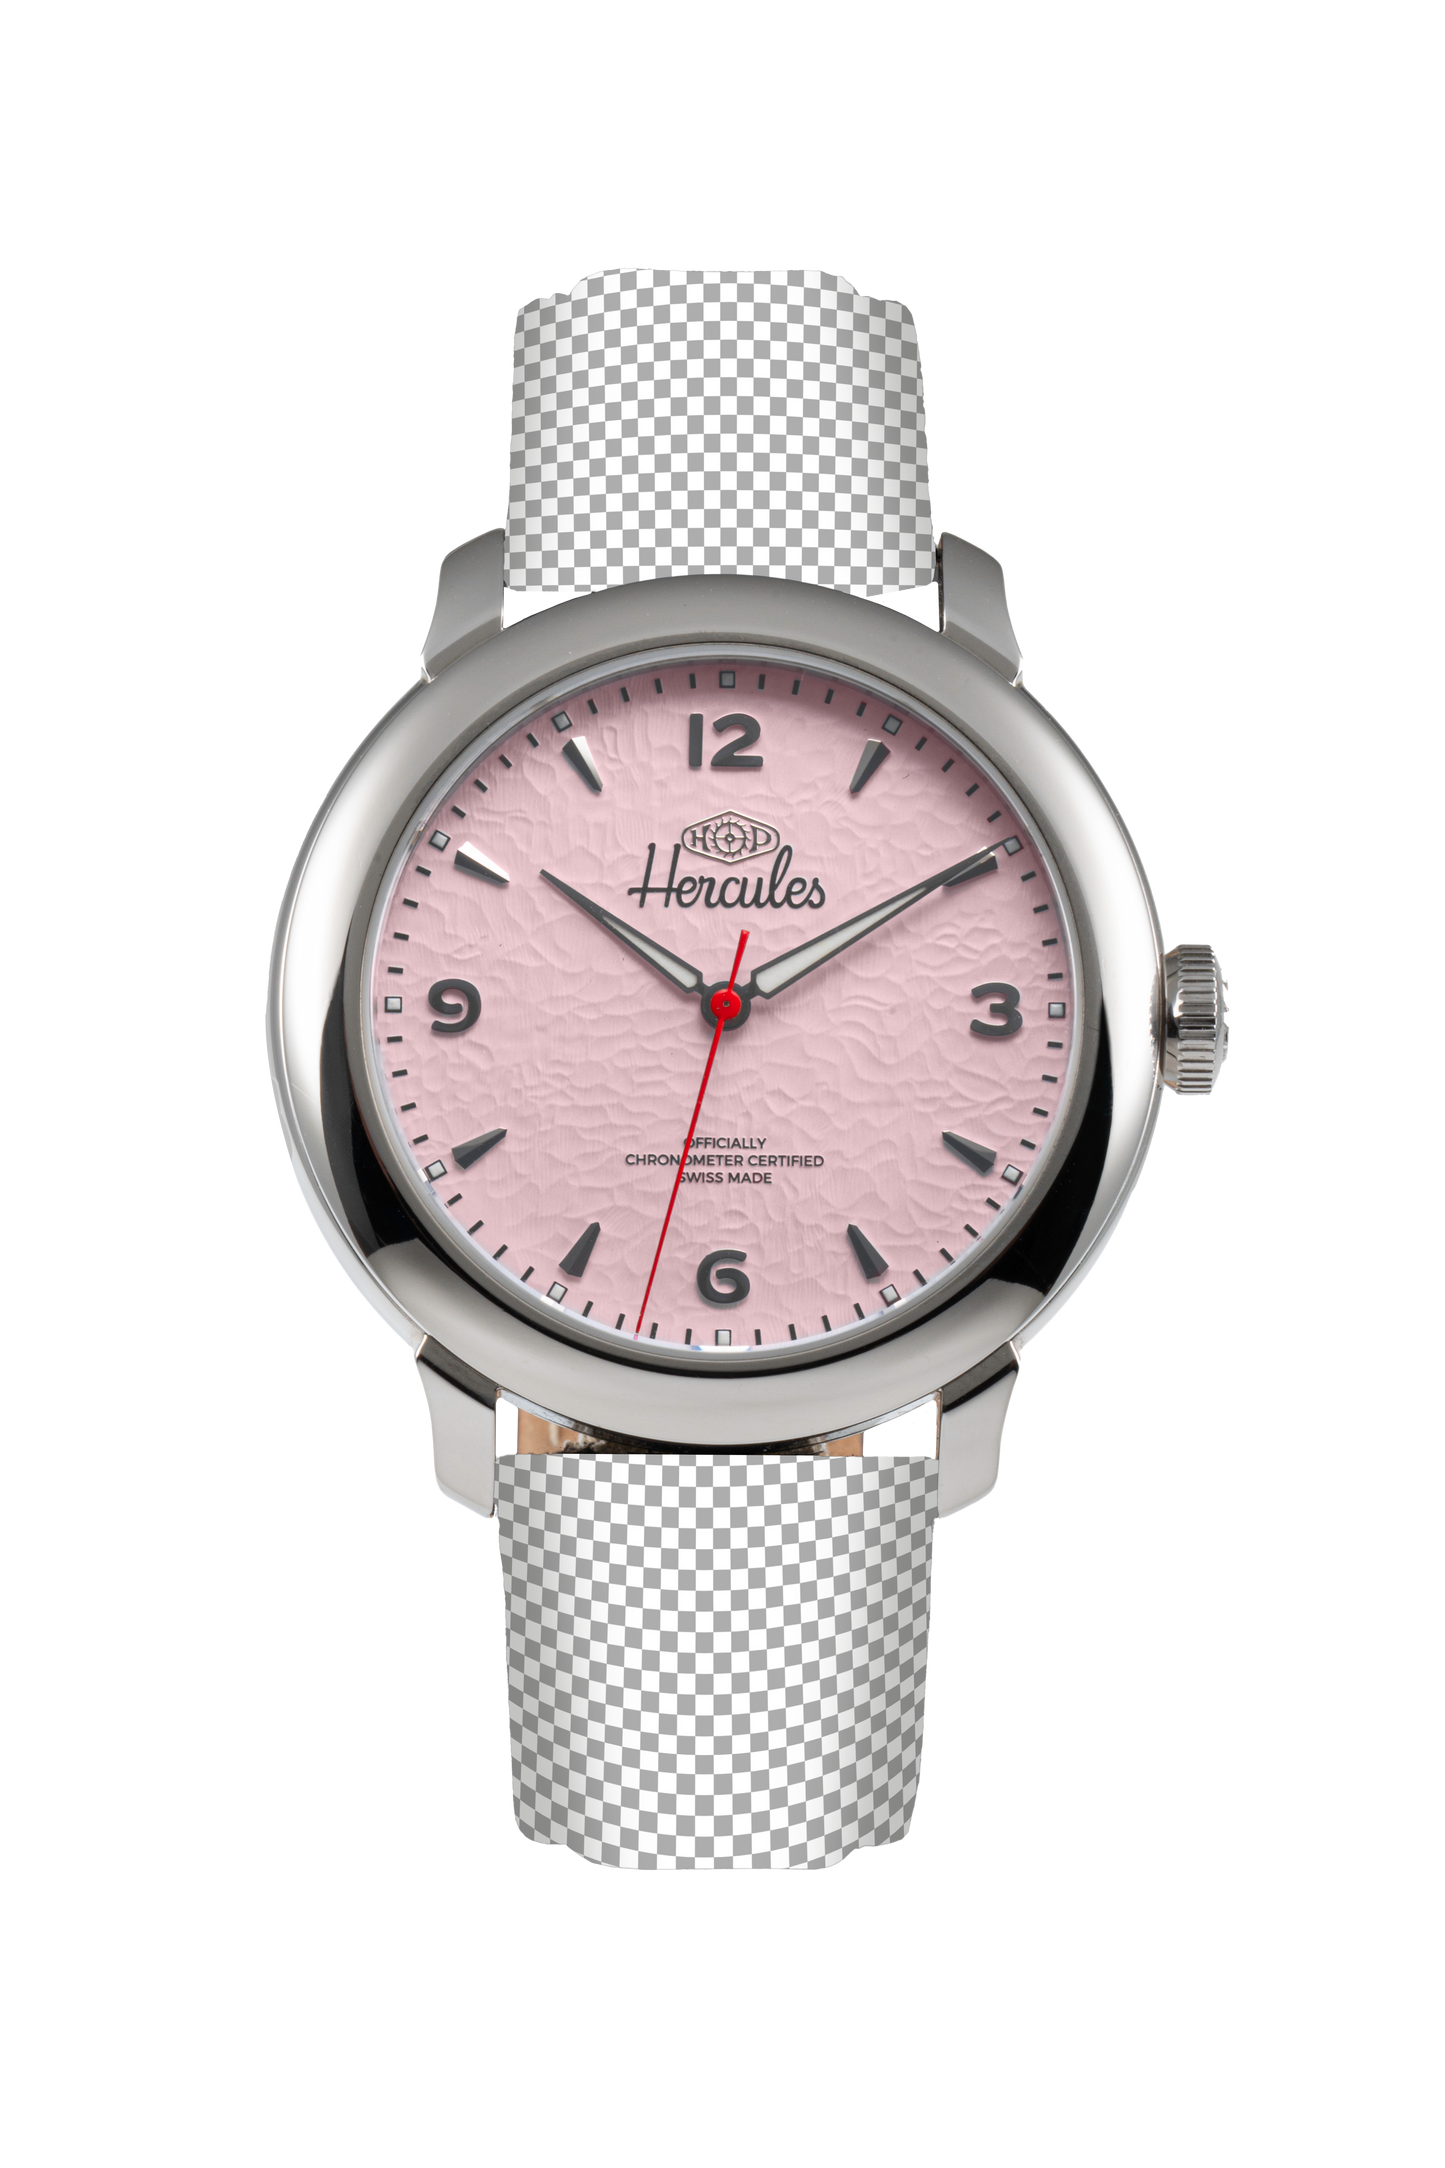 Hercules MICRO-ROTOR AUTOMATIC WATCHES